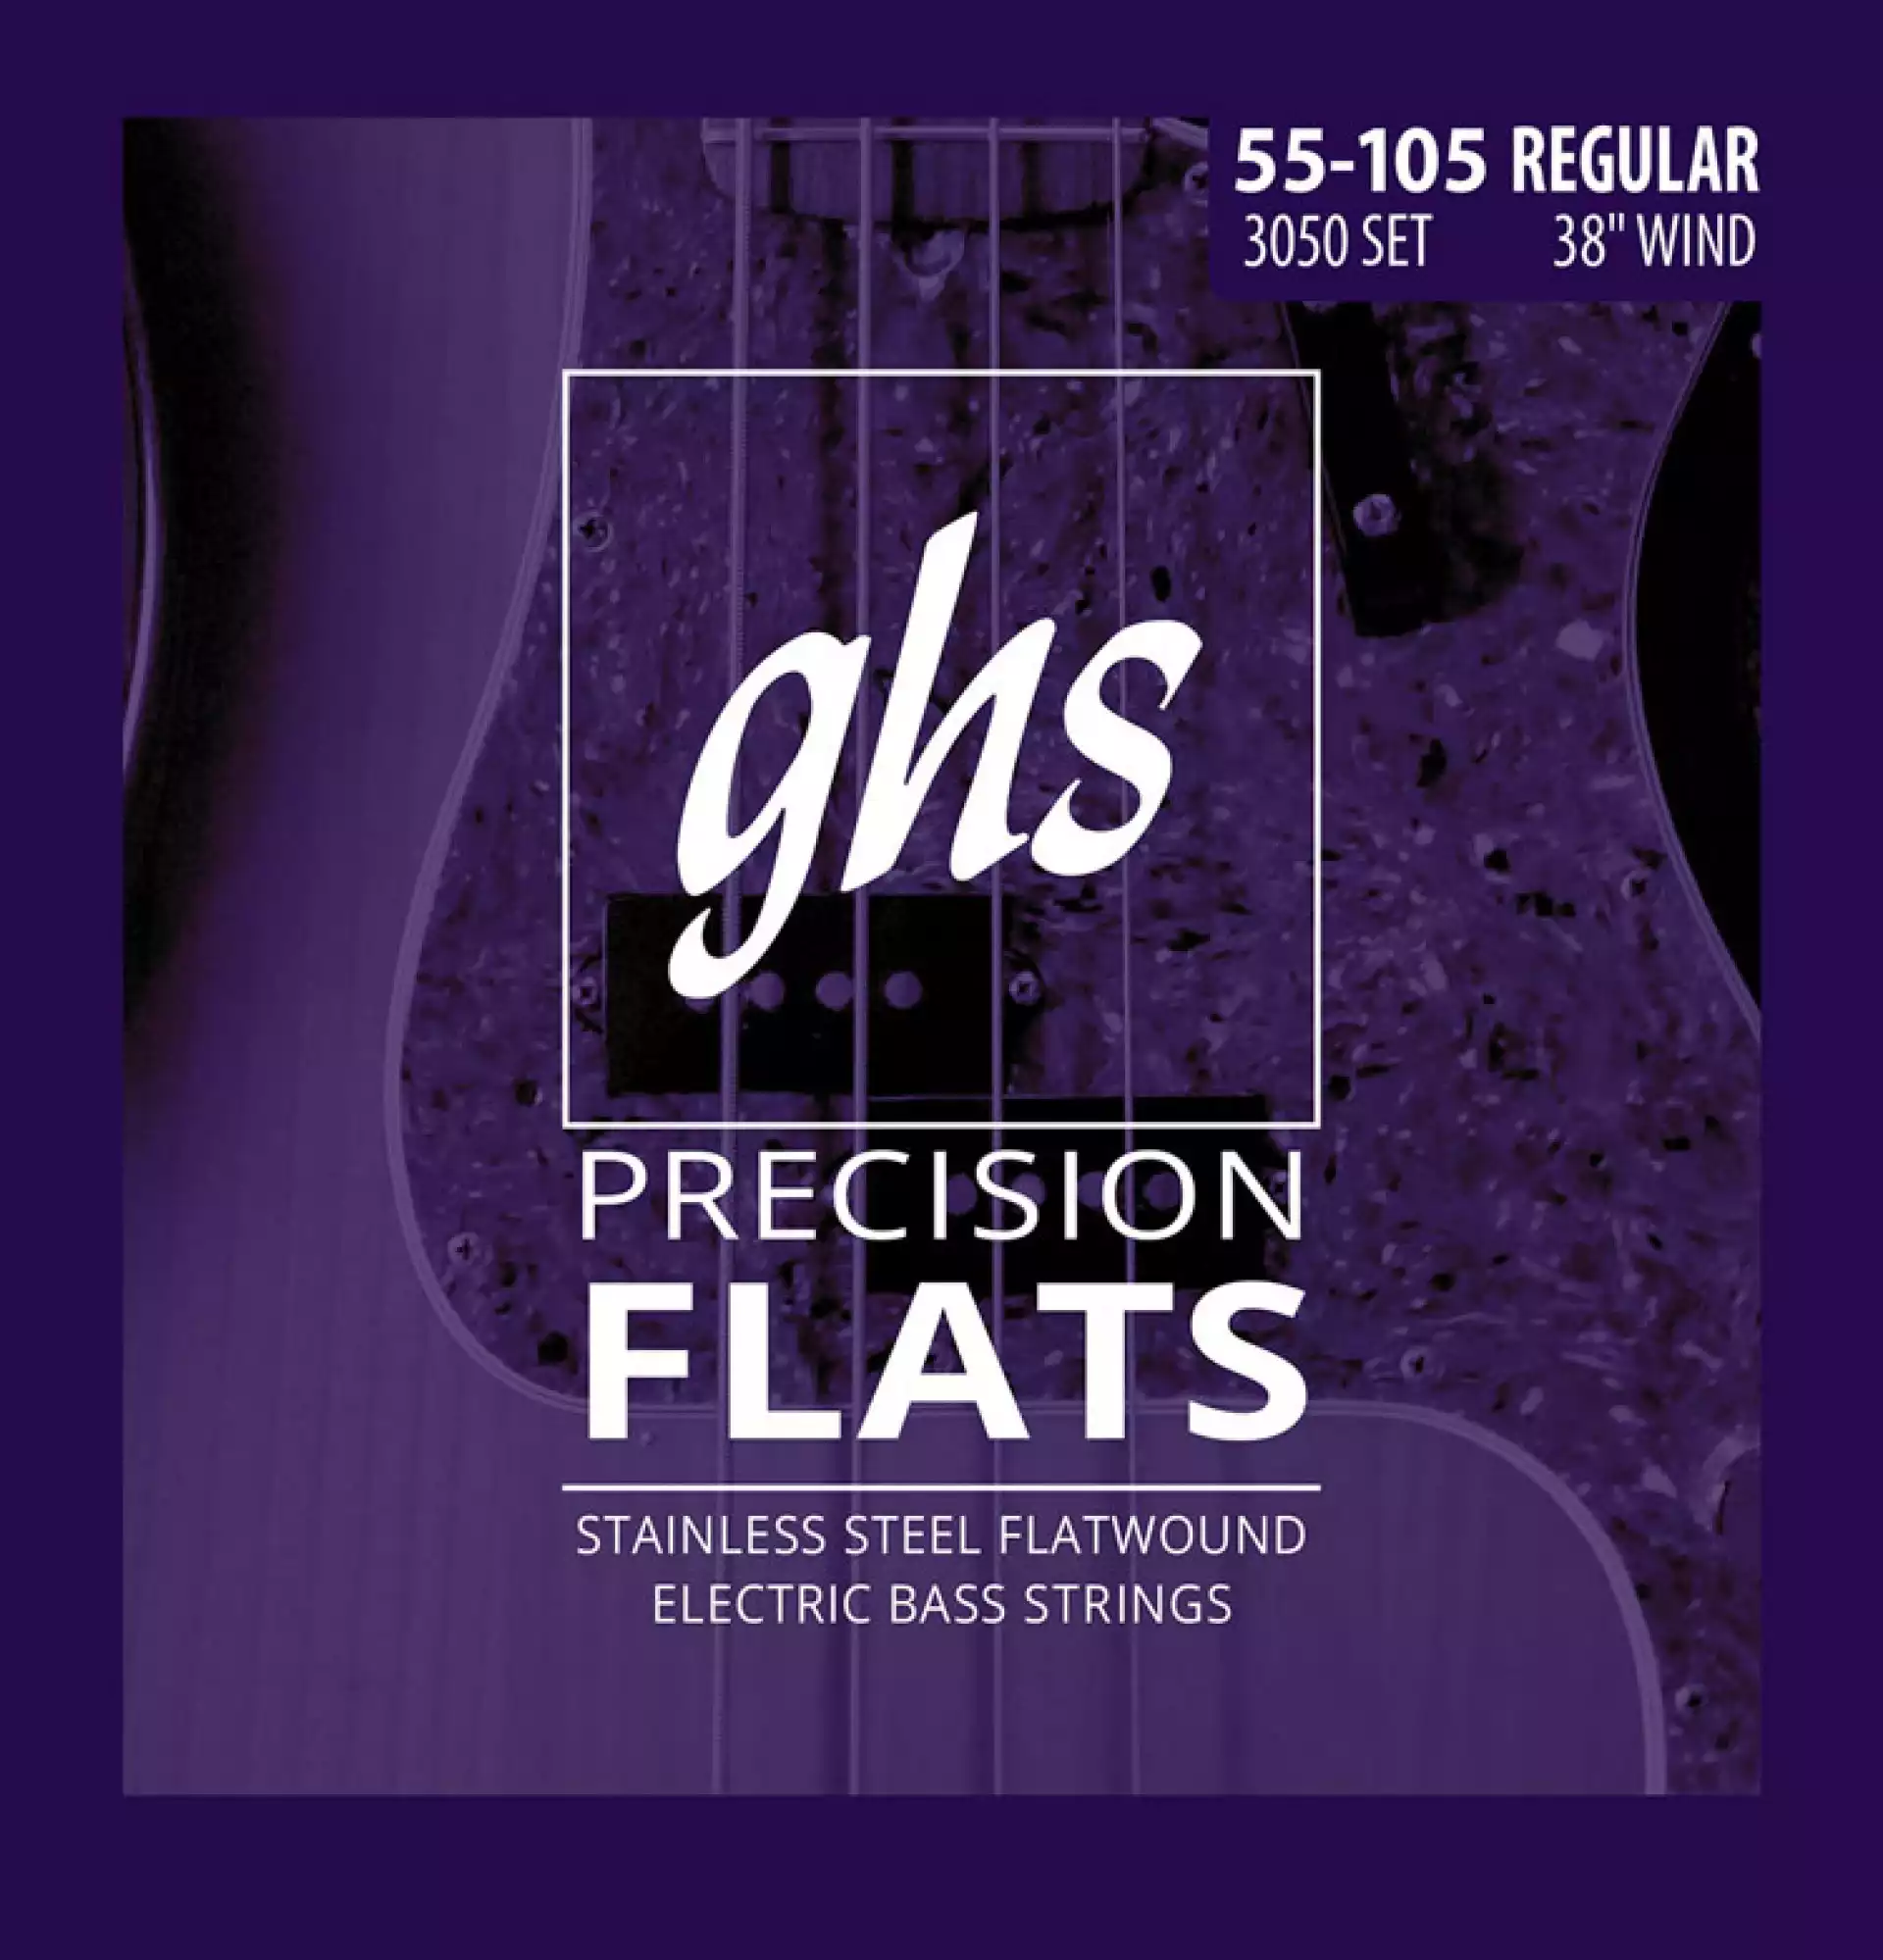 GHS 3050 Precision Flats Flatwound Bass Strings Long Scale Plus - 4-String 55-105 Regular